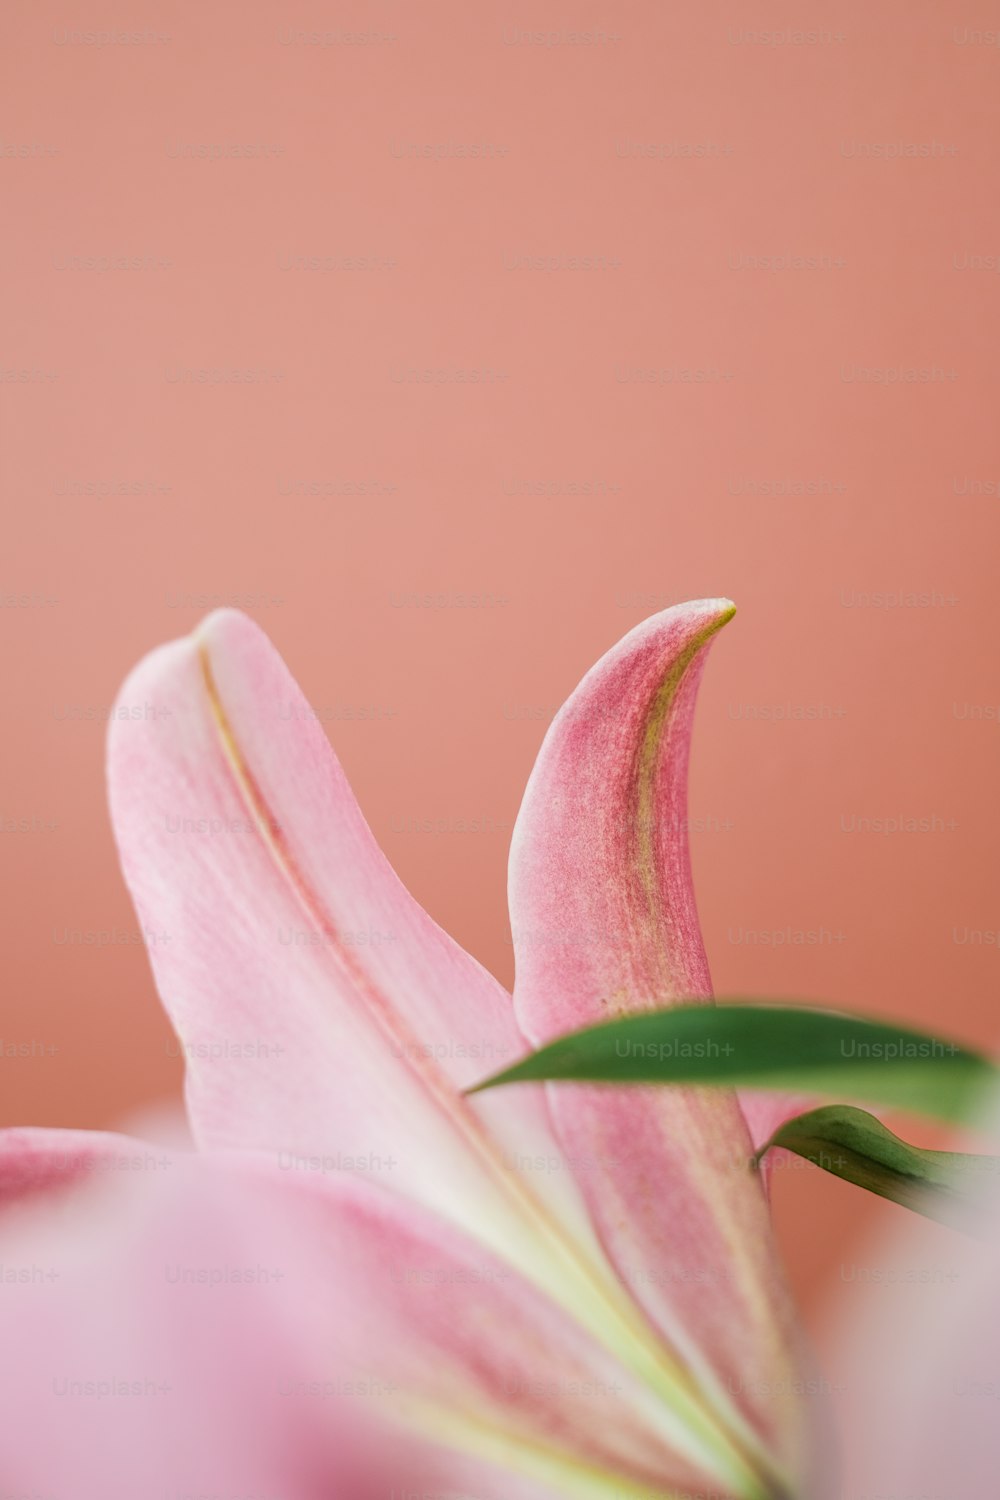 Pink Lily Photos, Download The BEST Free Pink Lily Stock Photos & HD Images